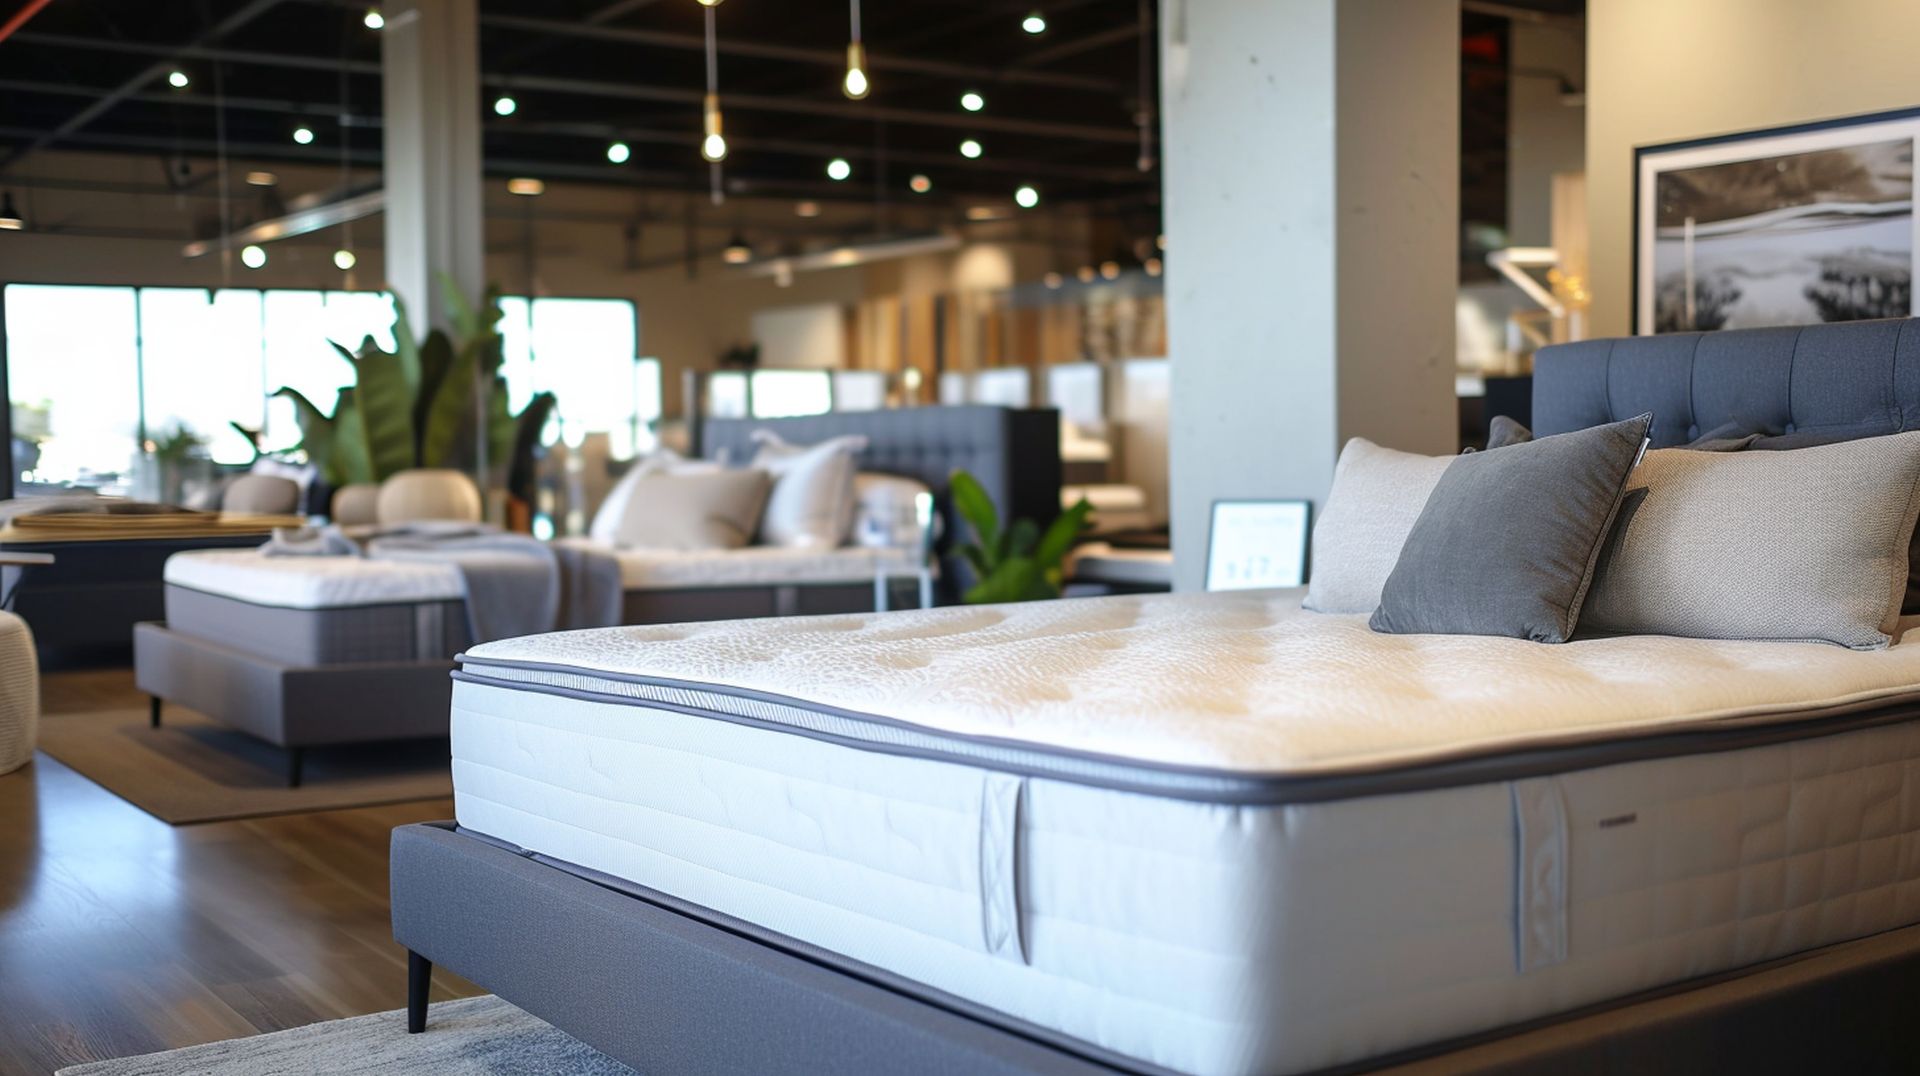 Local Binghamton mattress stores have the best prices, sales, and deals if you're looking for a new mattress in Binghamton